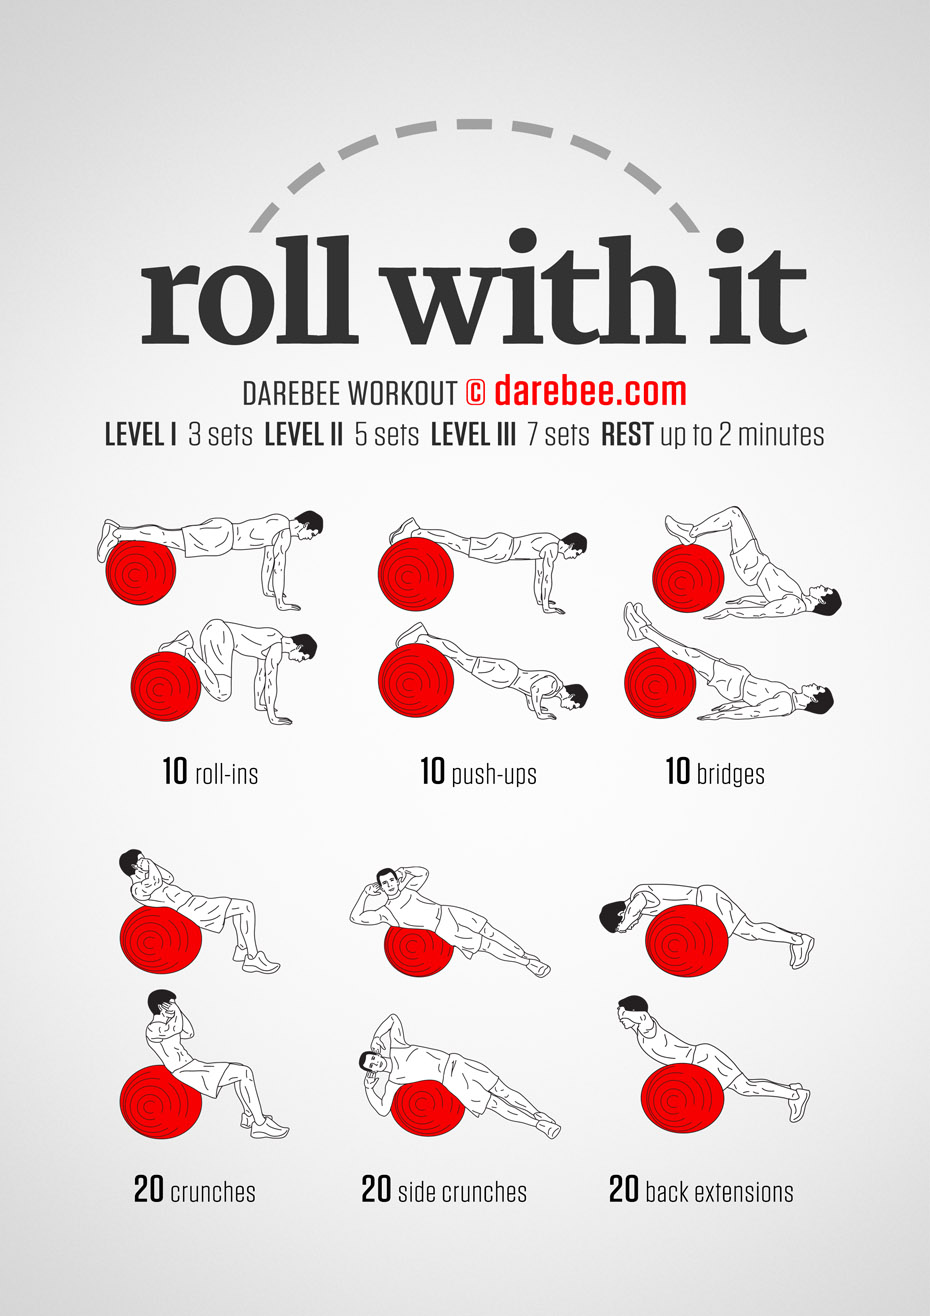 https://darebee.com/images/workouts/roll-with-it-workout.jpg